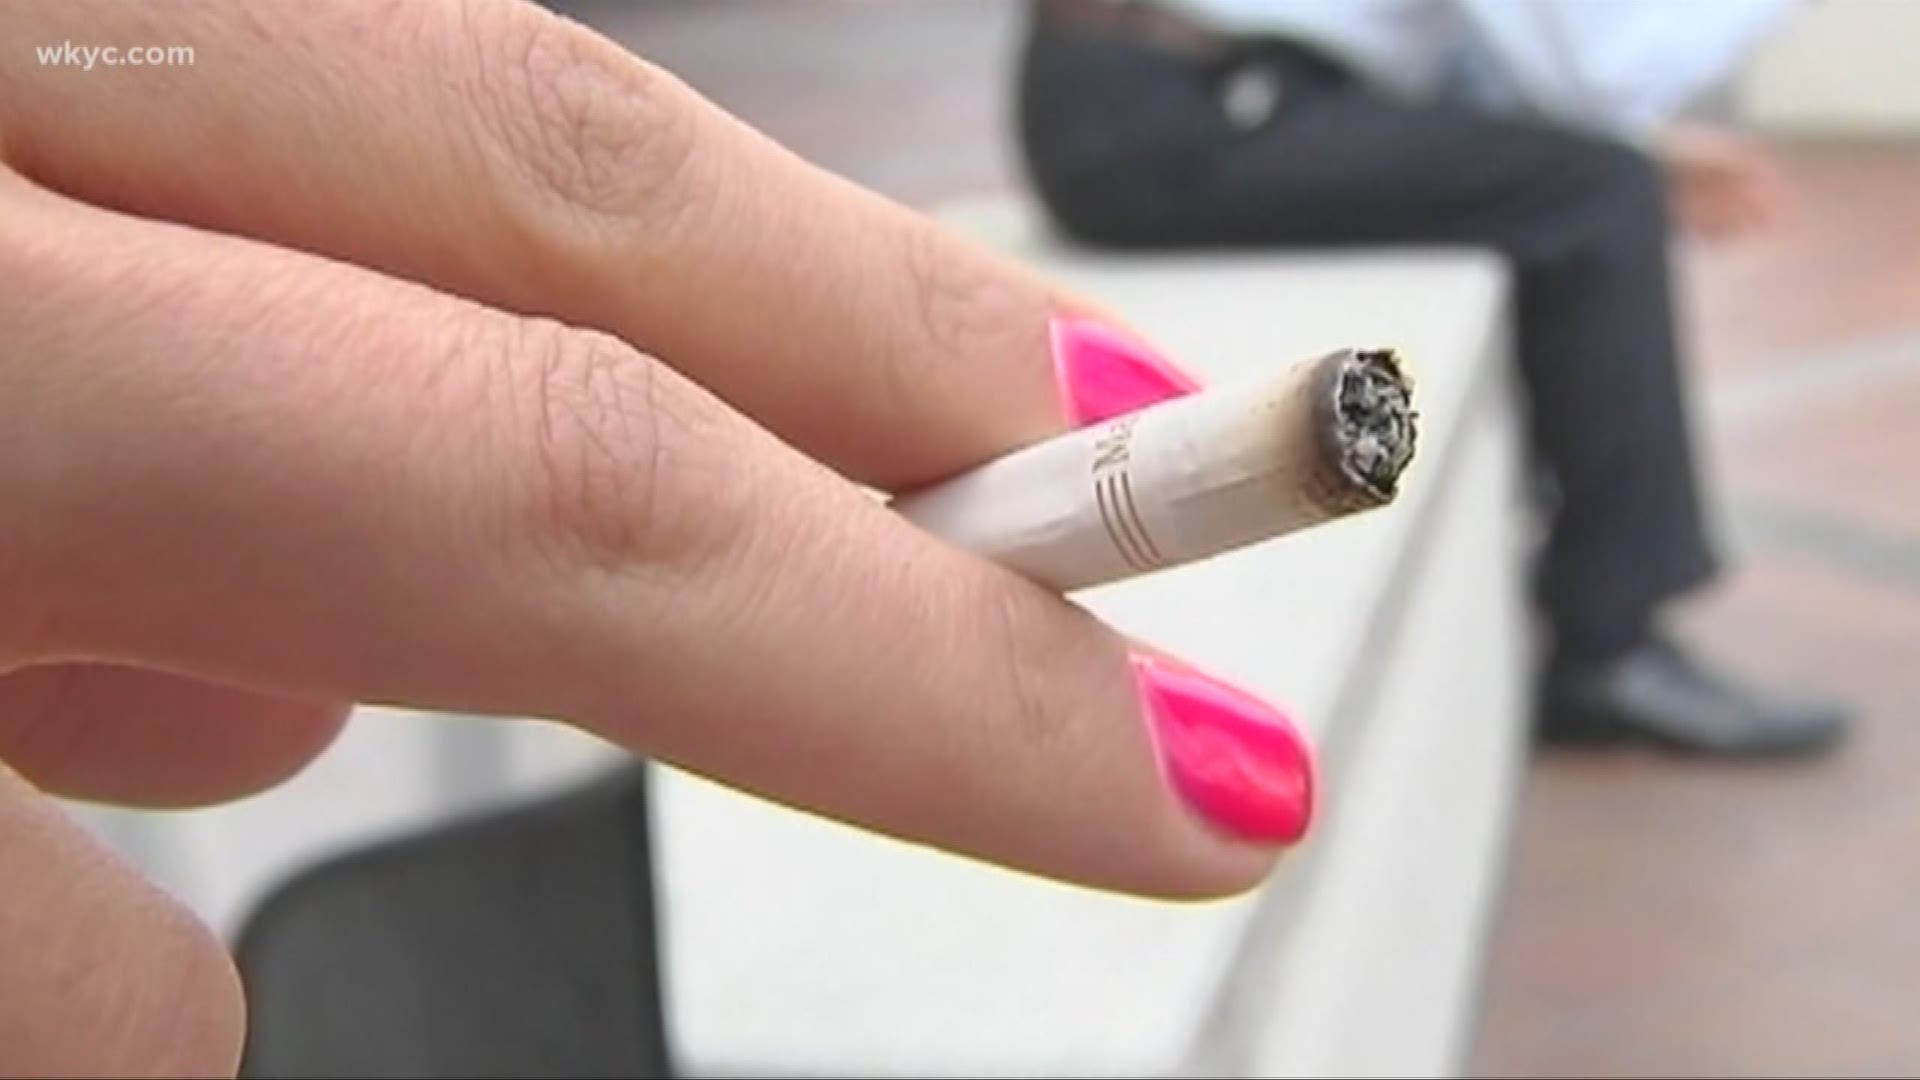 Summit county working to crack down on tobacco